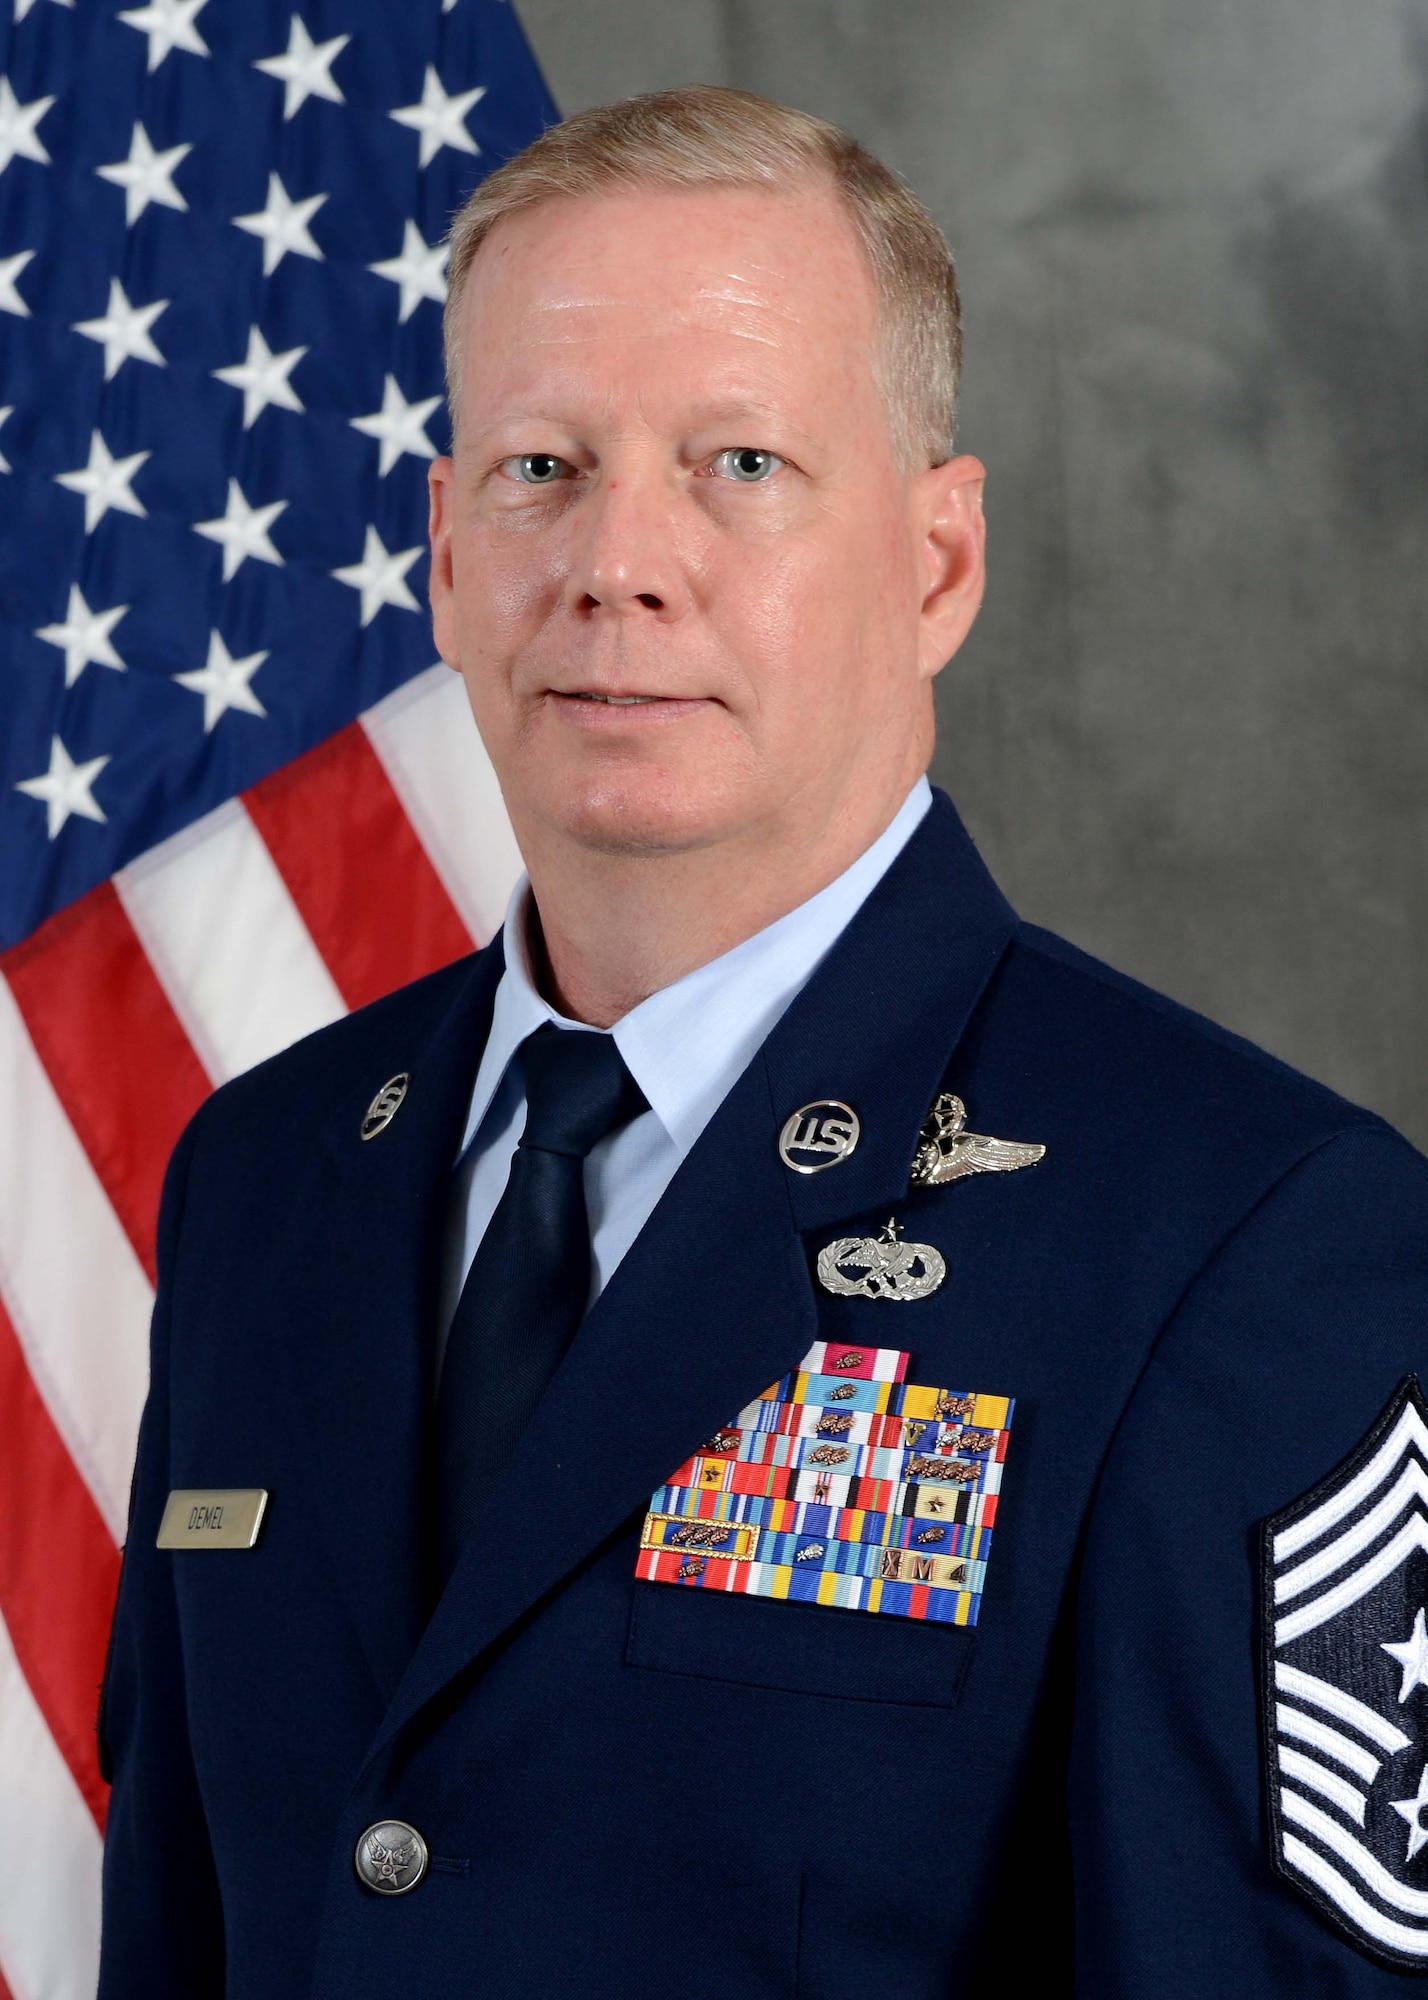 U.S Air Force Chief Master Sgt. Darren Demel poses for his official portrait at McConnell Air Force Base, Kan., April 3, 2016. Demel is slated to become command chief of the 307th Bomb Wing at Barksdale Air Force Base, La. (U.S. Air Force photo by Technical Sgt. Abigail Klein/Released)